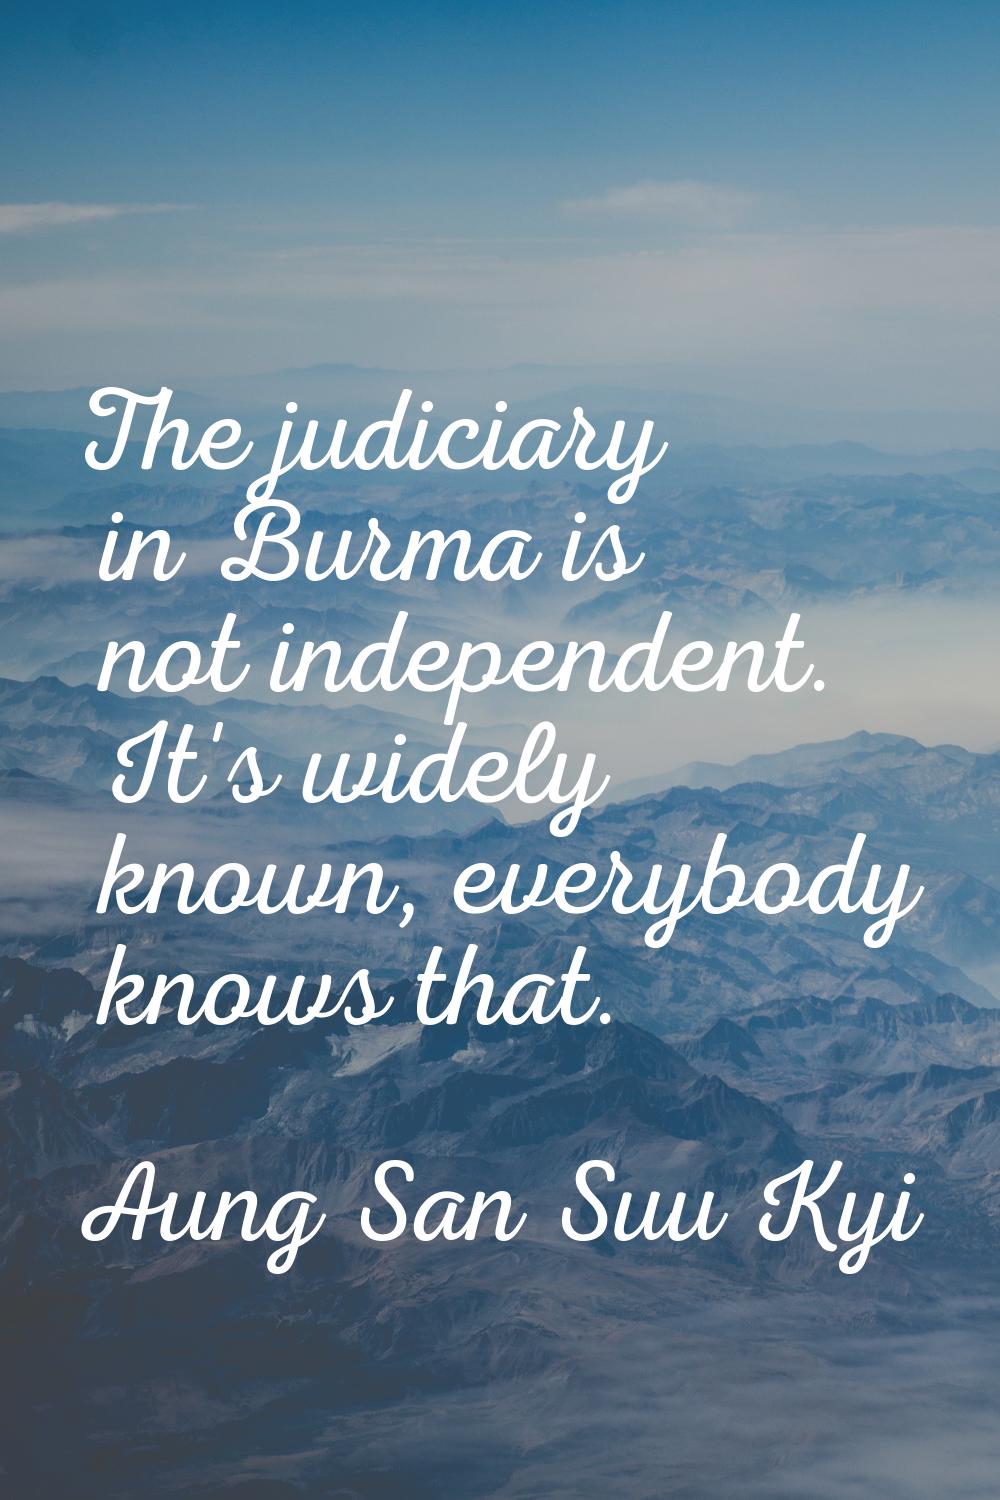 The judiciary in Burma is not independent. It's widely known, everybody knows that.